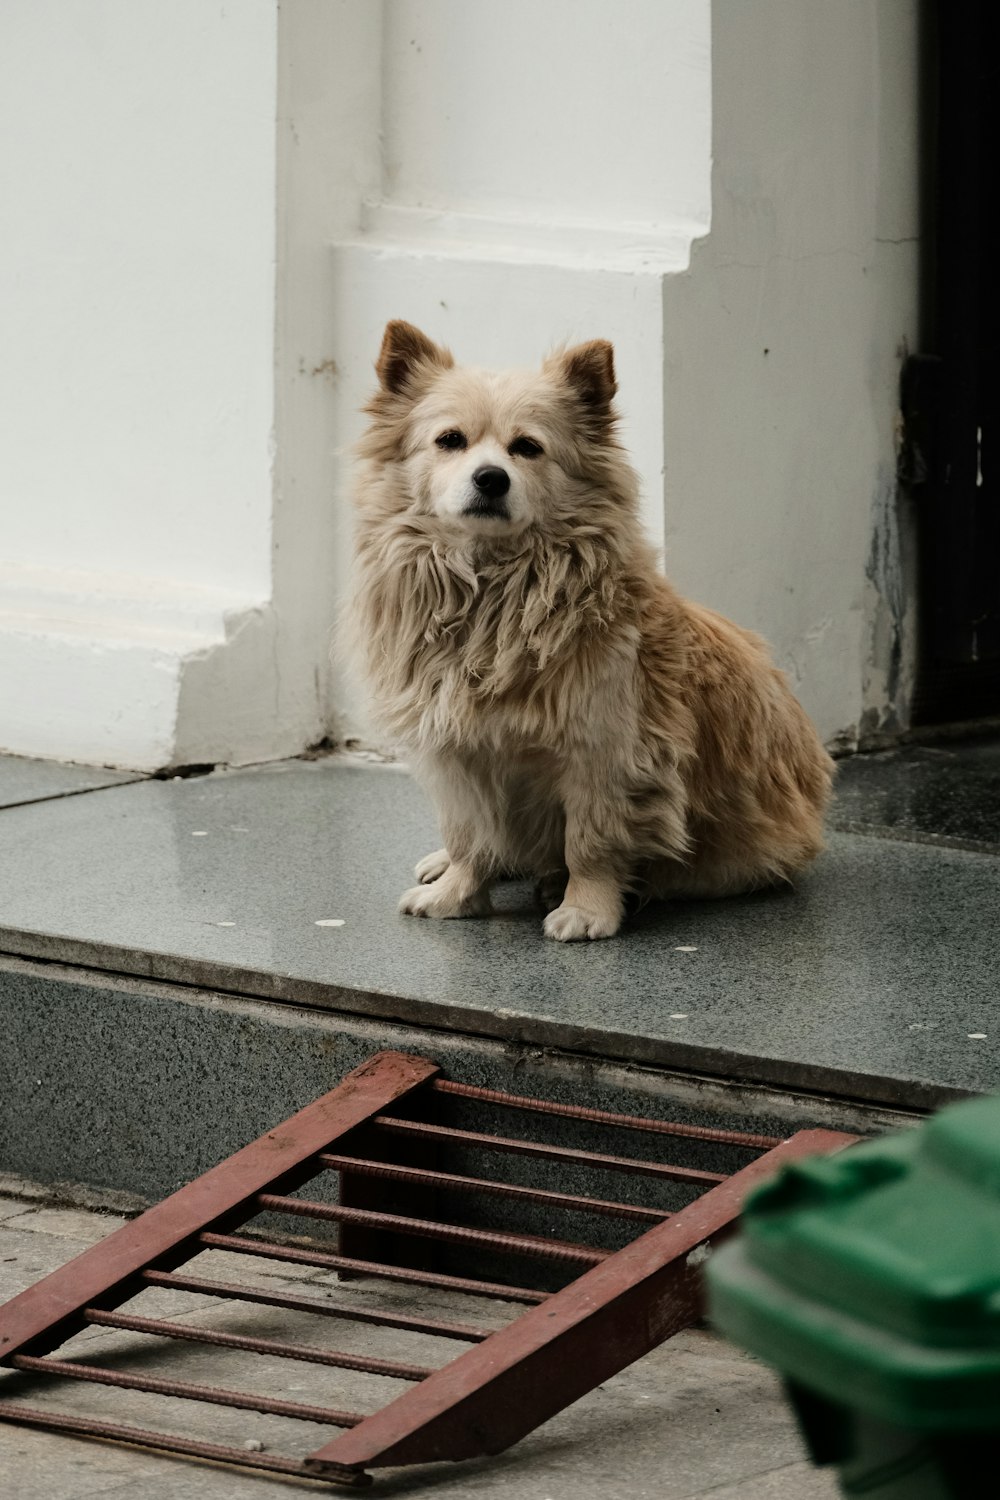 a dog sitting on a step next to a trash can